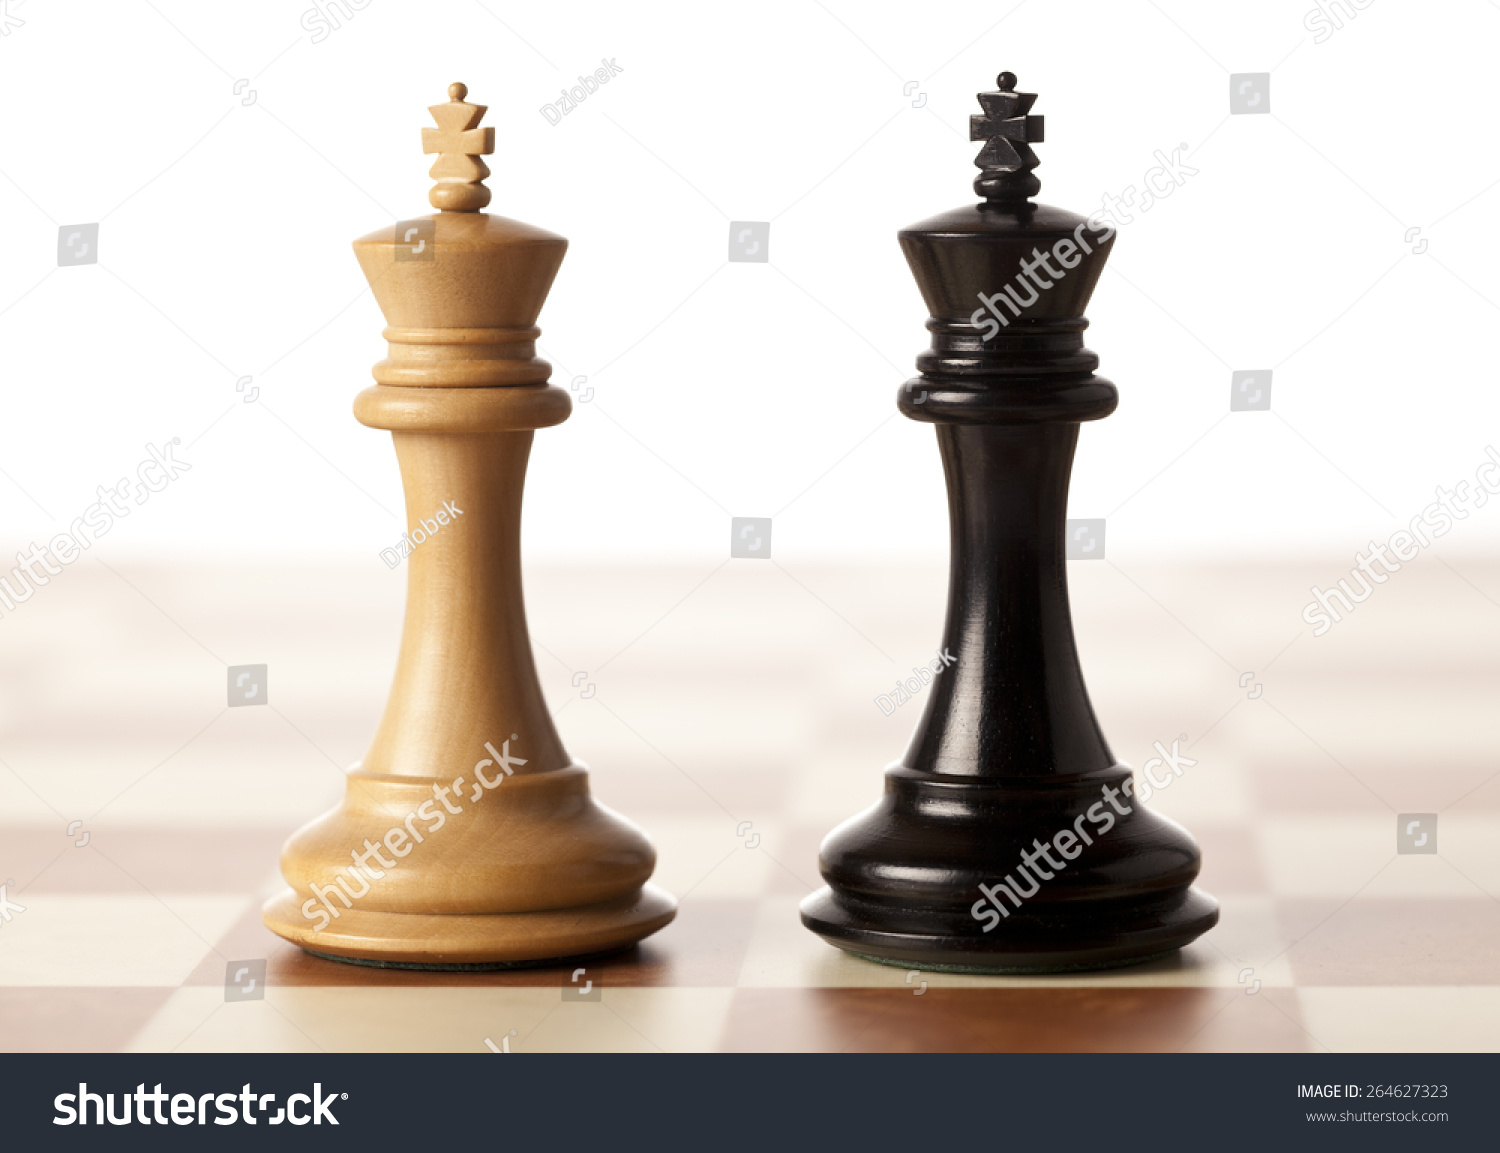 Impossible Situation - Two Chess Kings Standing Next To Each Other ...